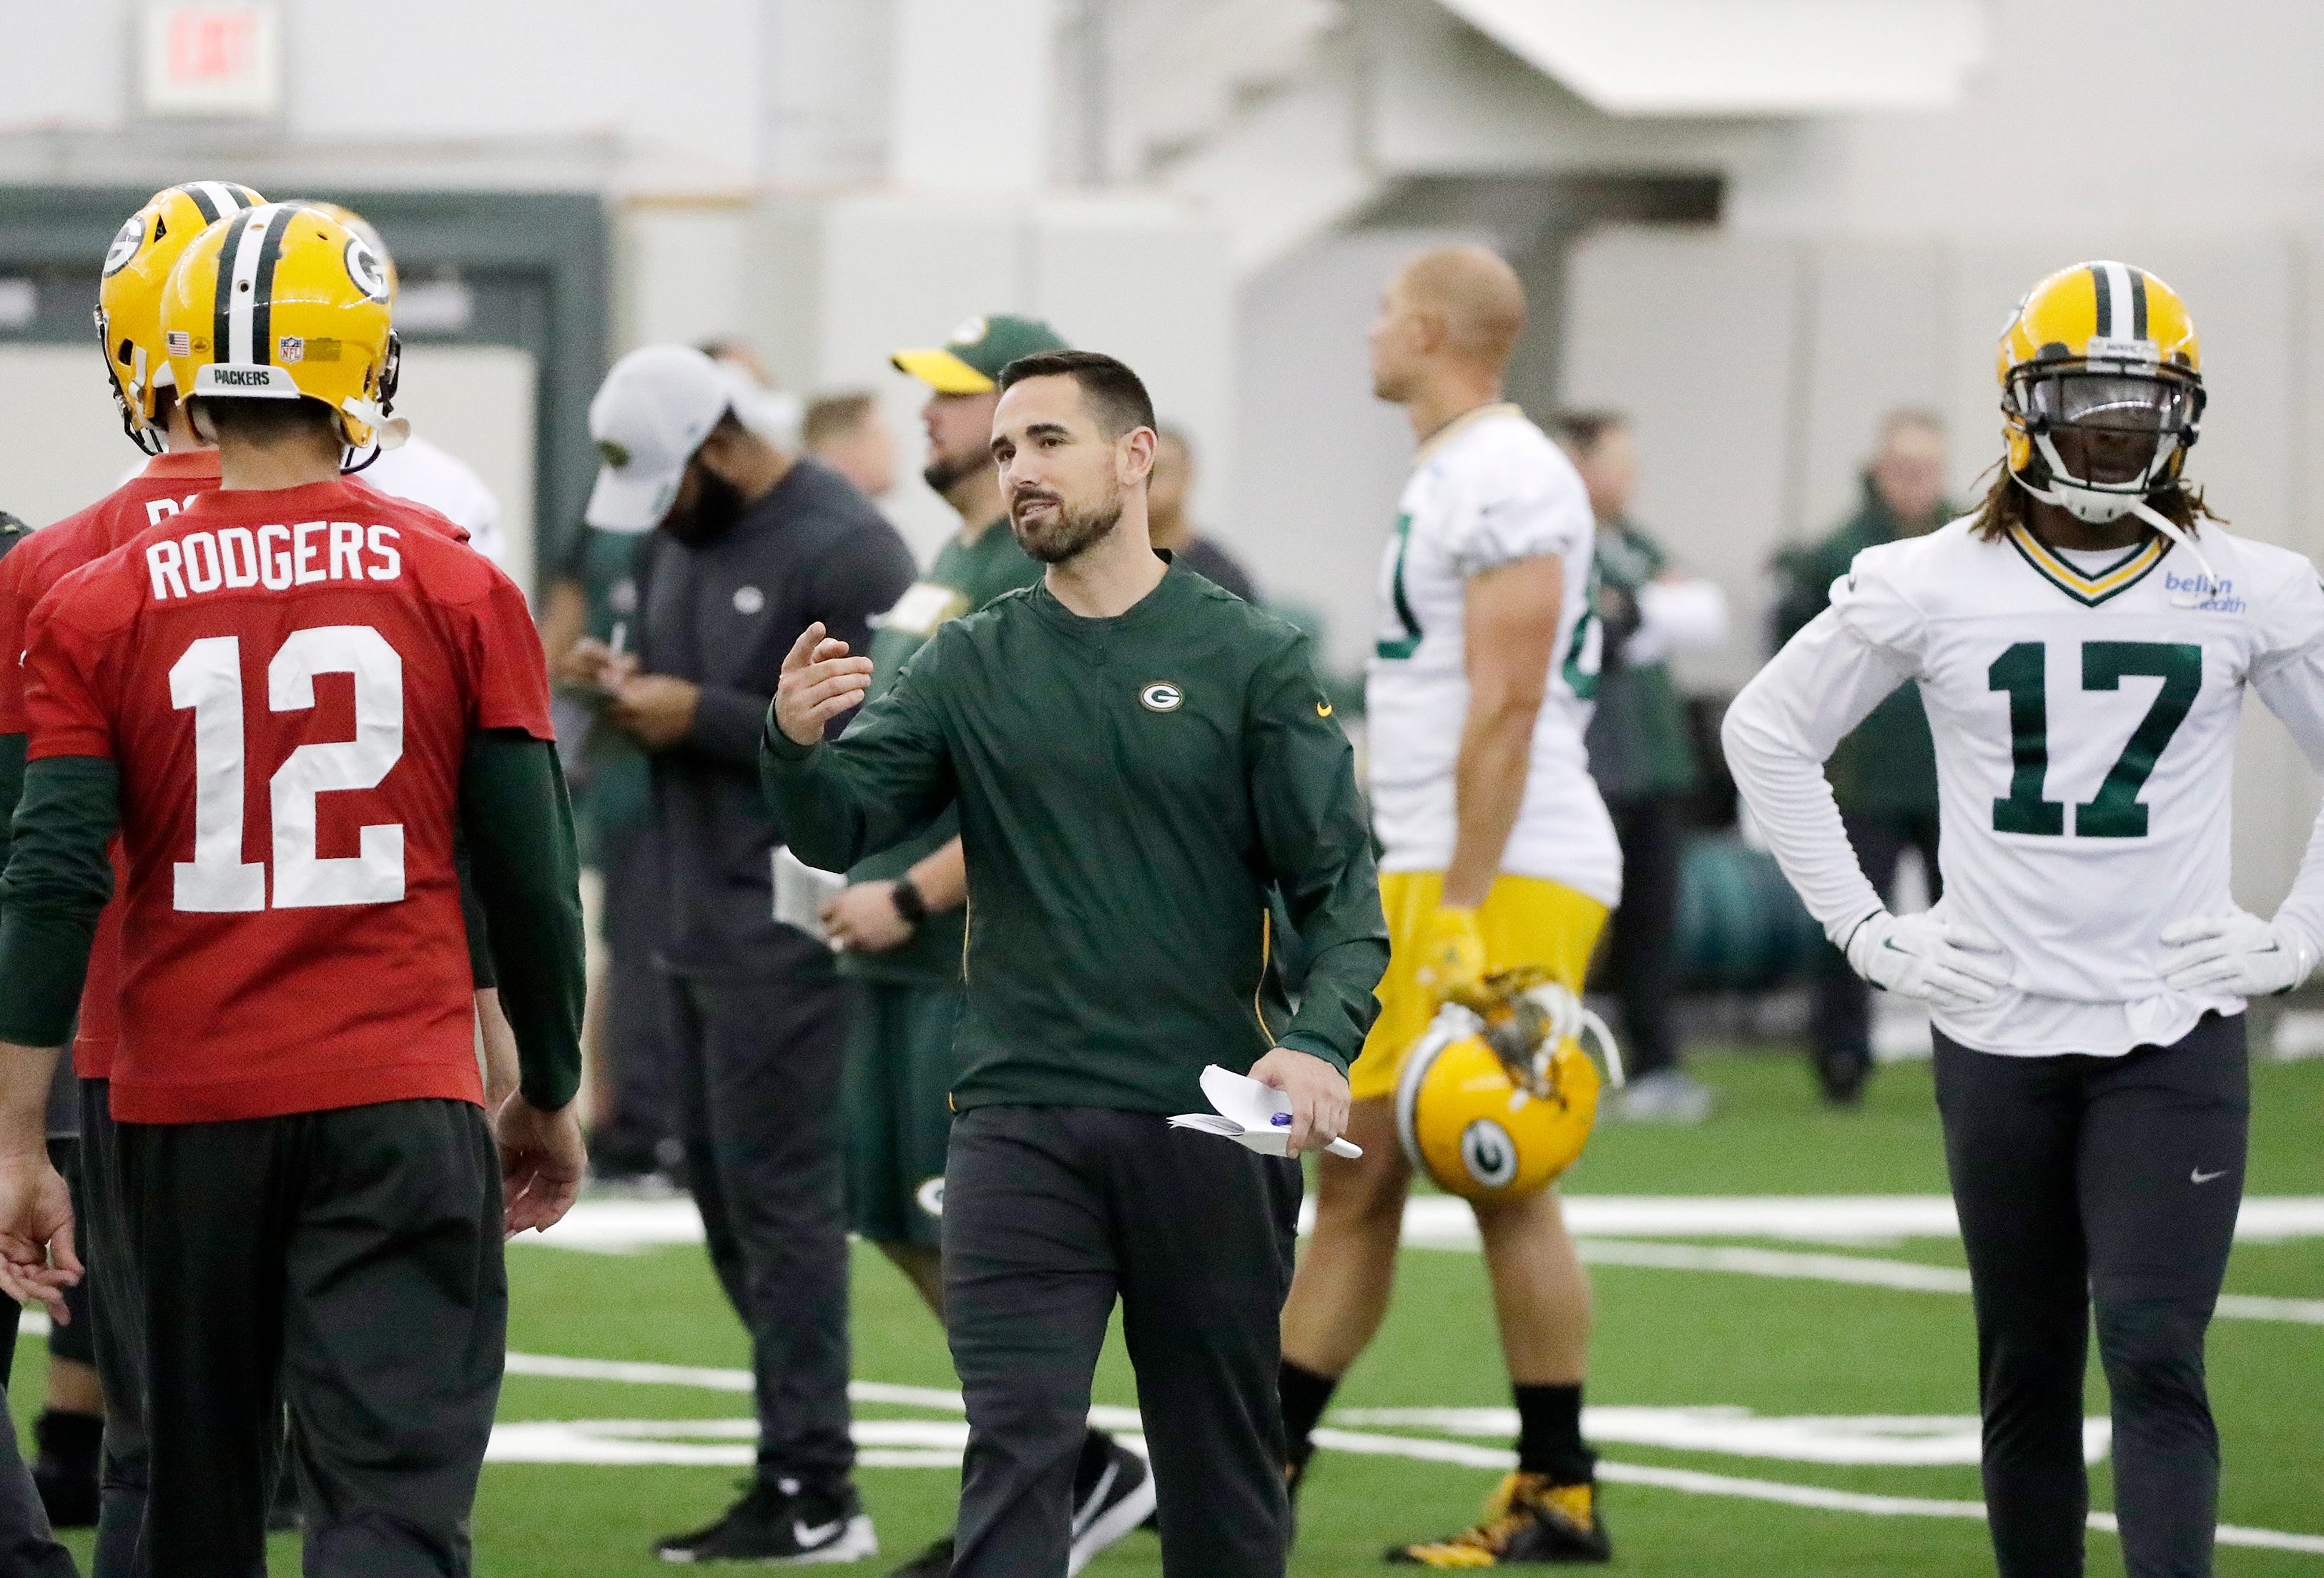 Green Bay Packers head coach Matt LaFleur talks to quarterback Aaron Rodgers (12) during a team practice at the Don Hutson Center on Wednesday, April 24, 2019 in Ashwaubenon, Wis.